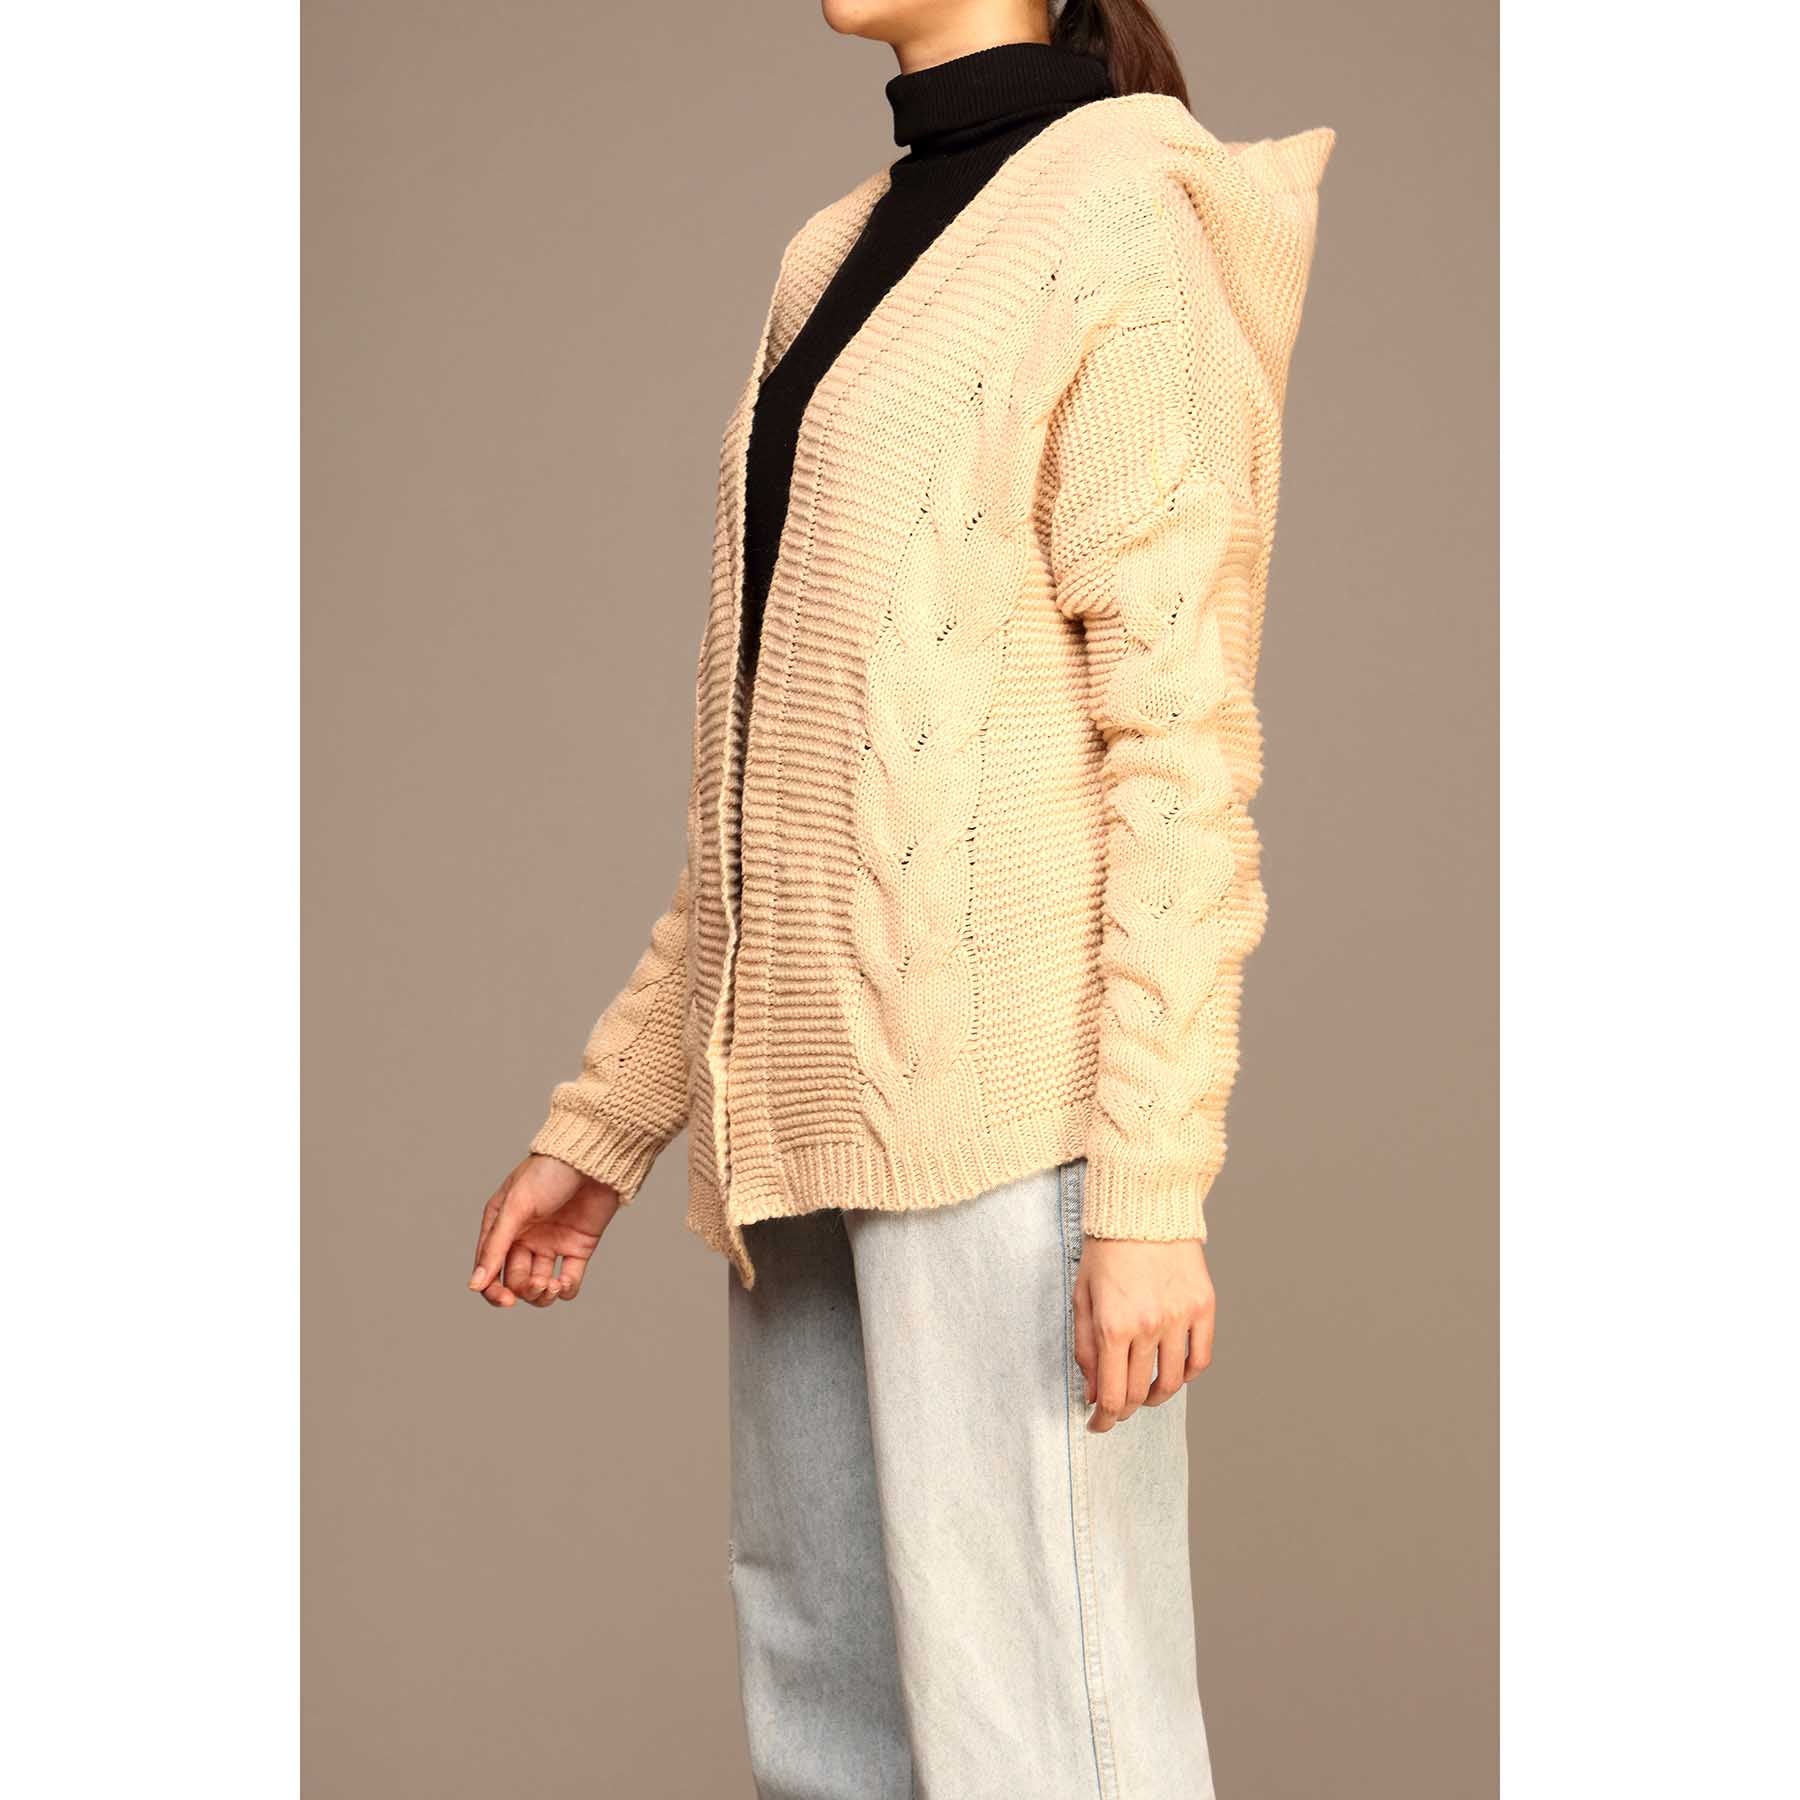 Beige Color Hooded Cardigan PW1917